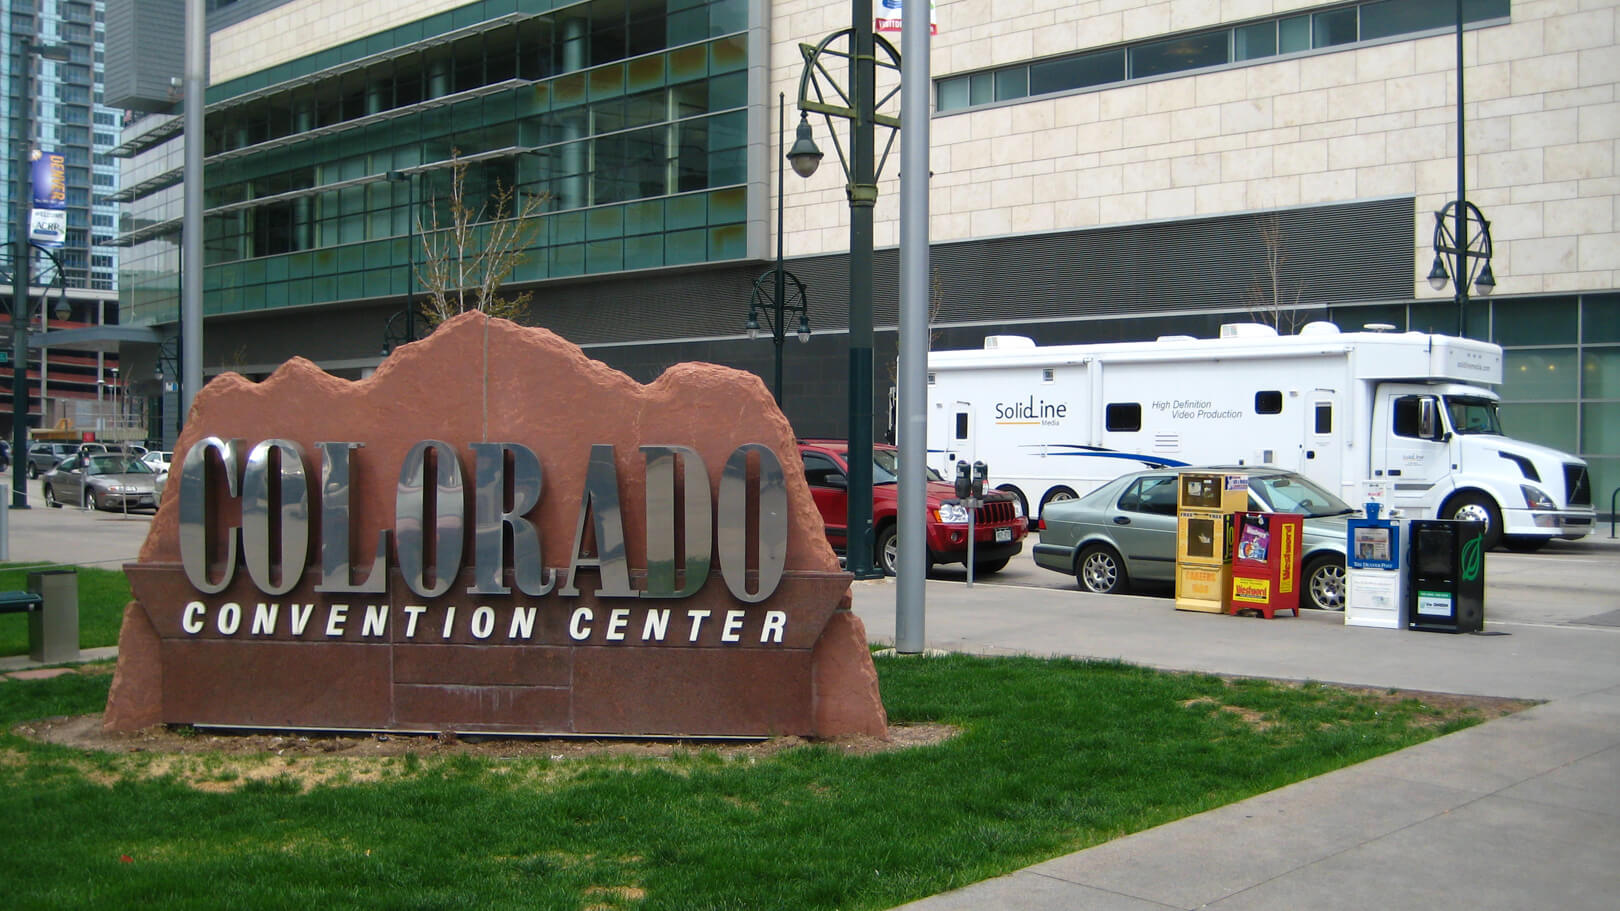 Here we have the SolidLine Truck parked outside of the Colorado Convention Center in Denver, CO